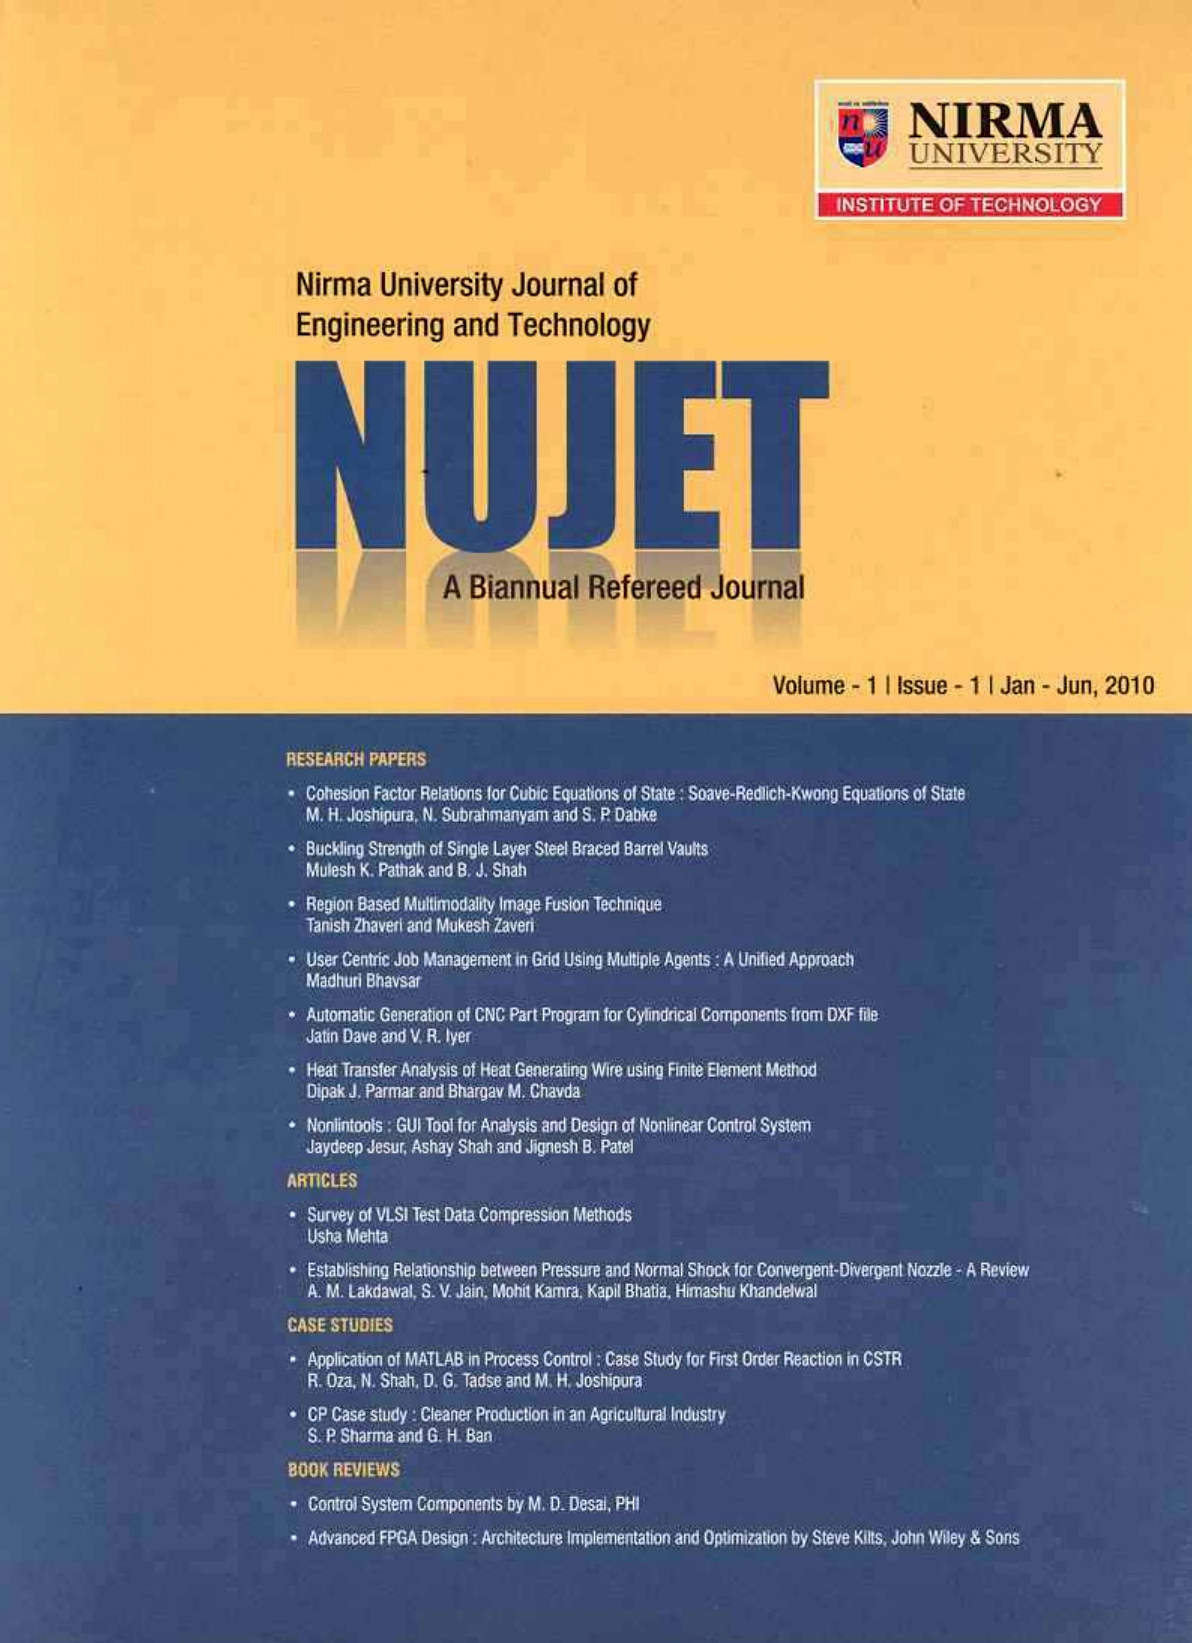 NUJET Cover